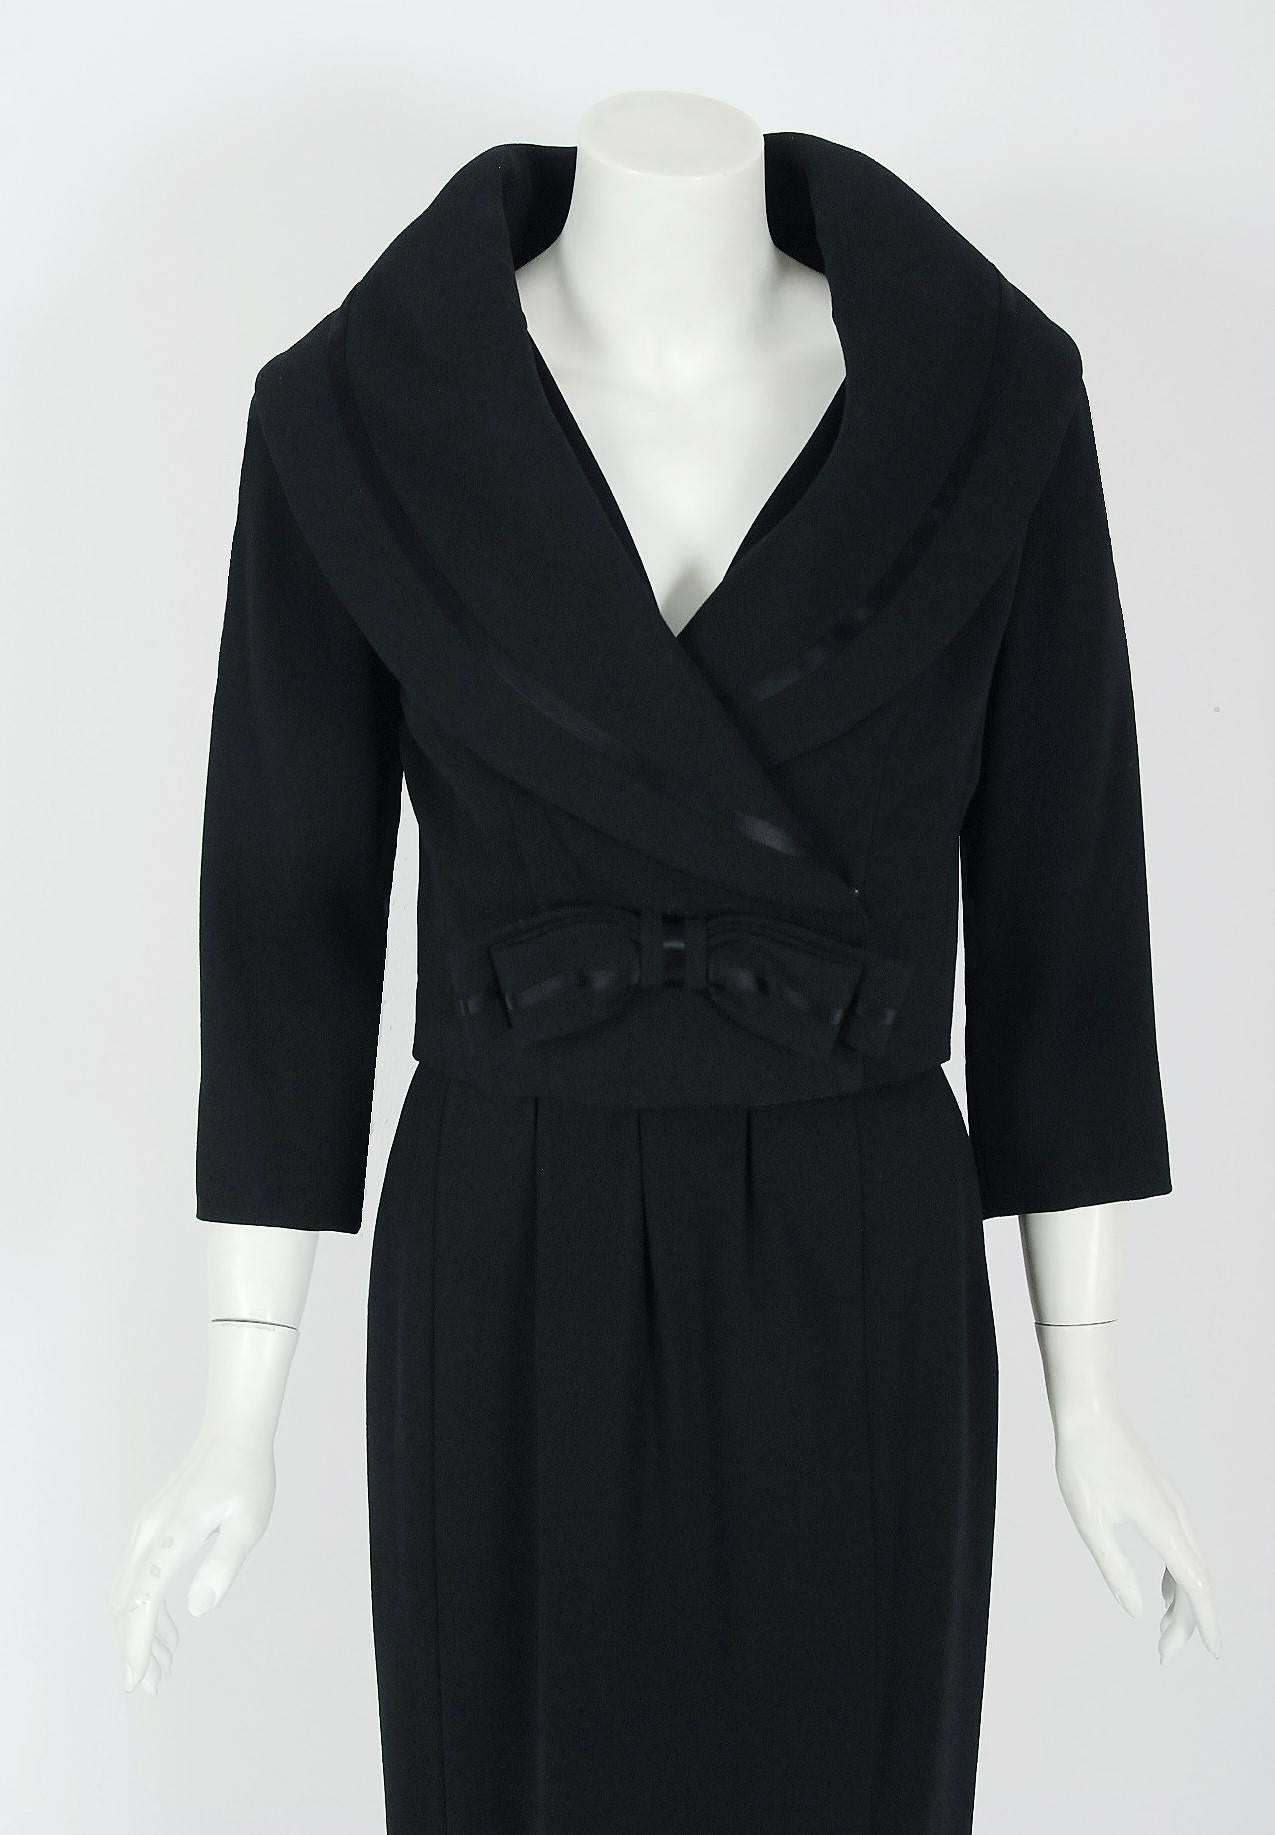 This 1955 Jean Patou Haute-Couture seductive black dress ensemble, in the most beautiful silhouette, is pure couture perfection. When the talented Marc Bohan took over as head designer in 1955, he continued the Patou tradition of elegant design.